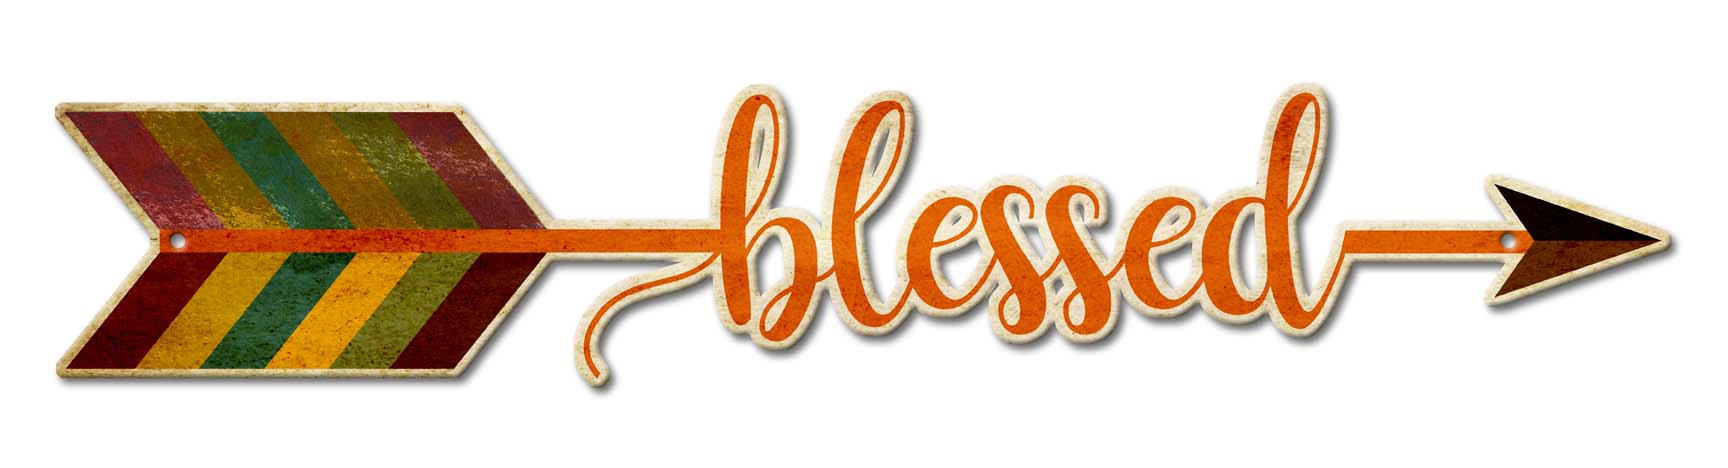 Blessed Arrow Vintage Sign